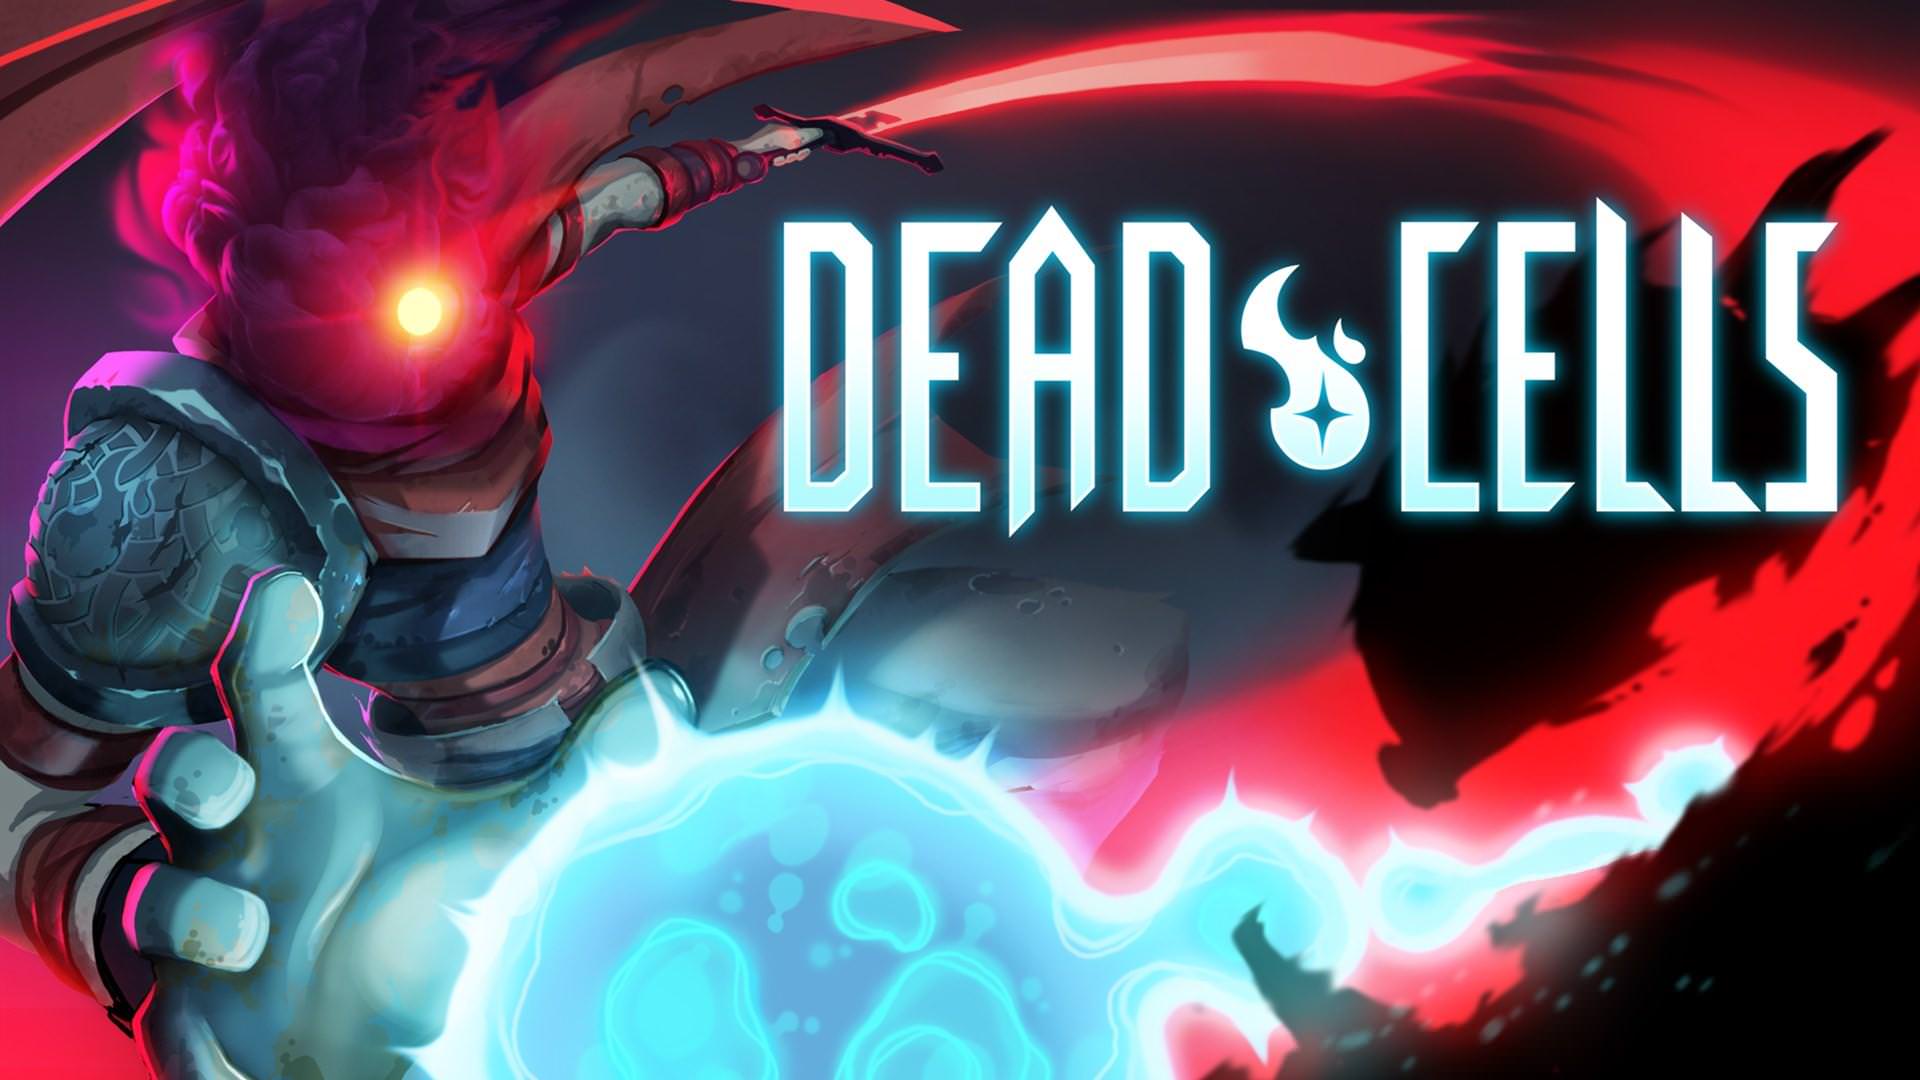 The main character of the Dead Cells action platformer game